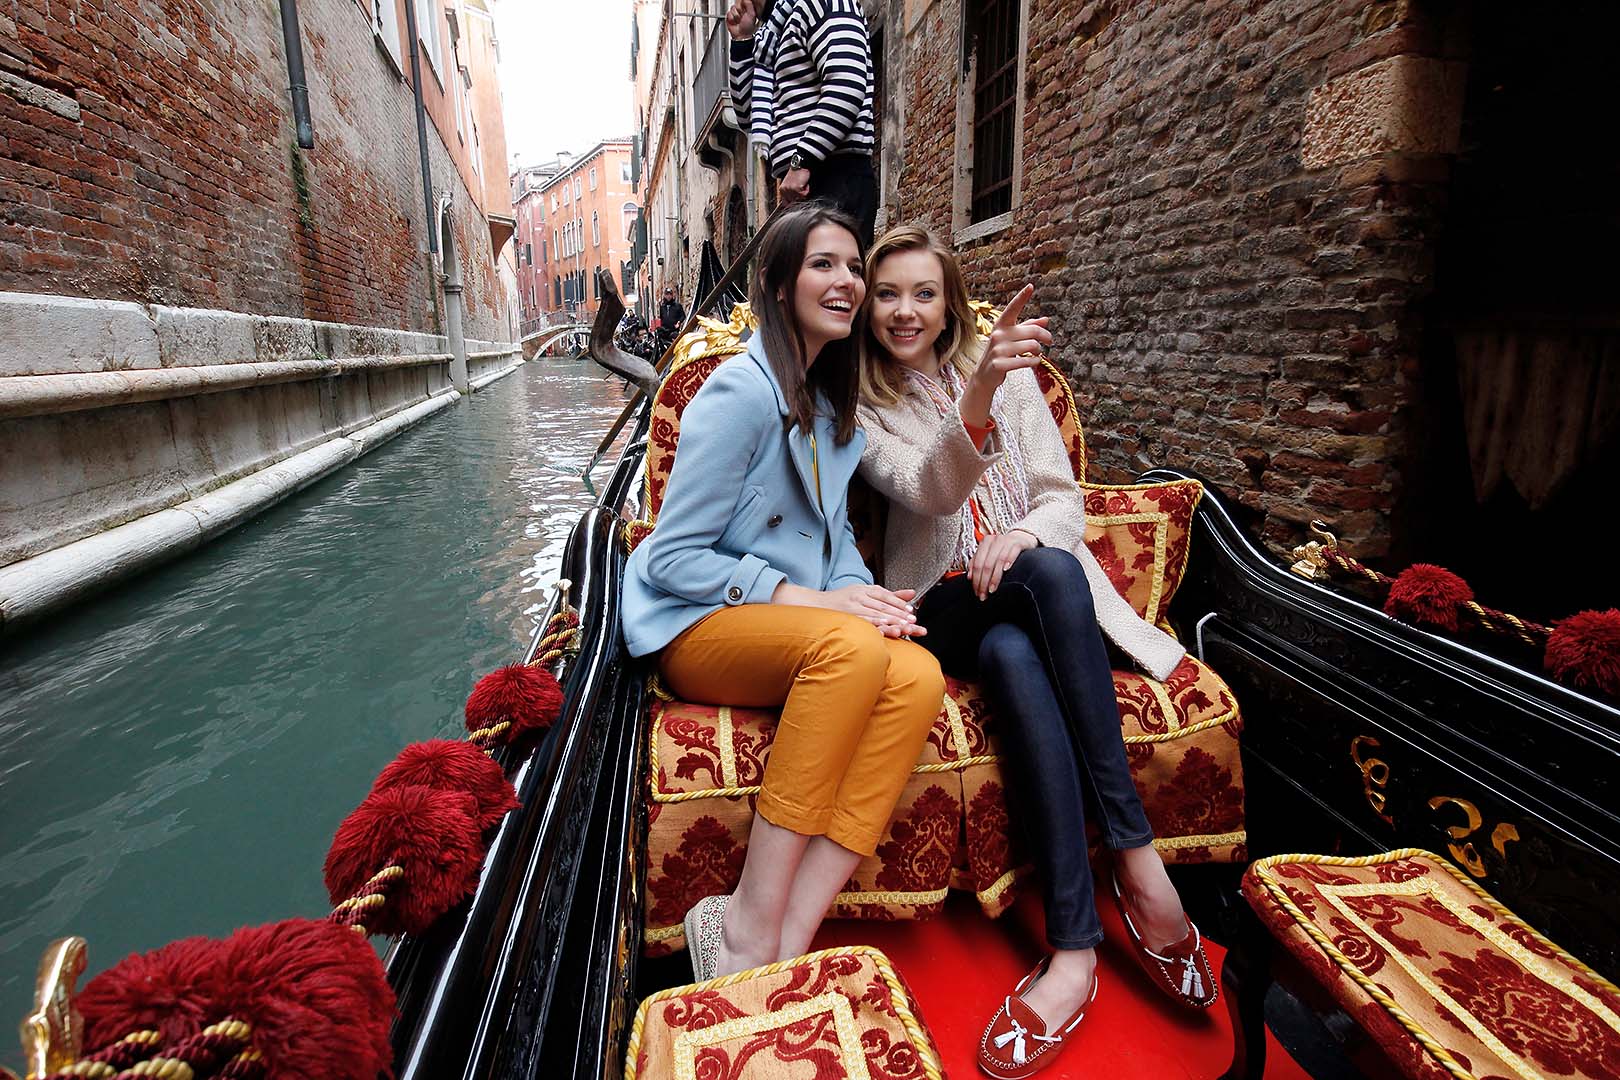 portrait of two women sitting on  red and yellow cusions in a gondola along a river of water between two brick buildings